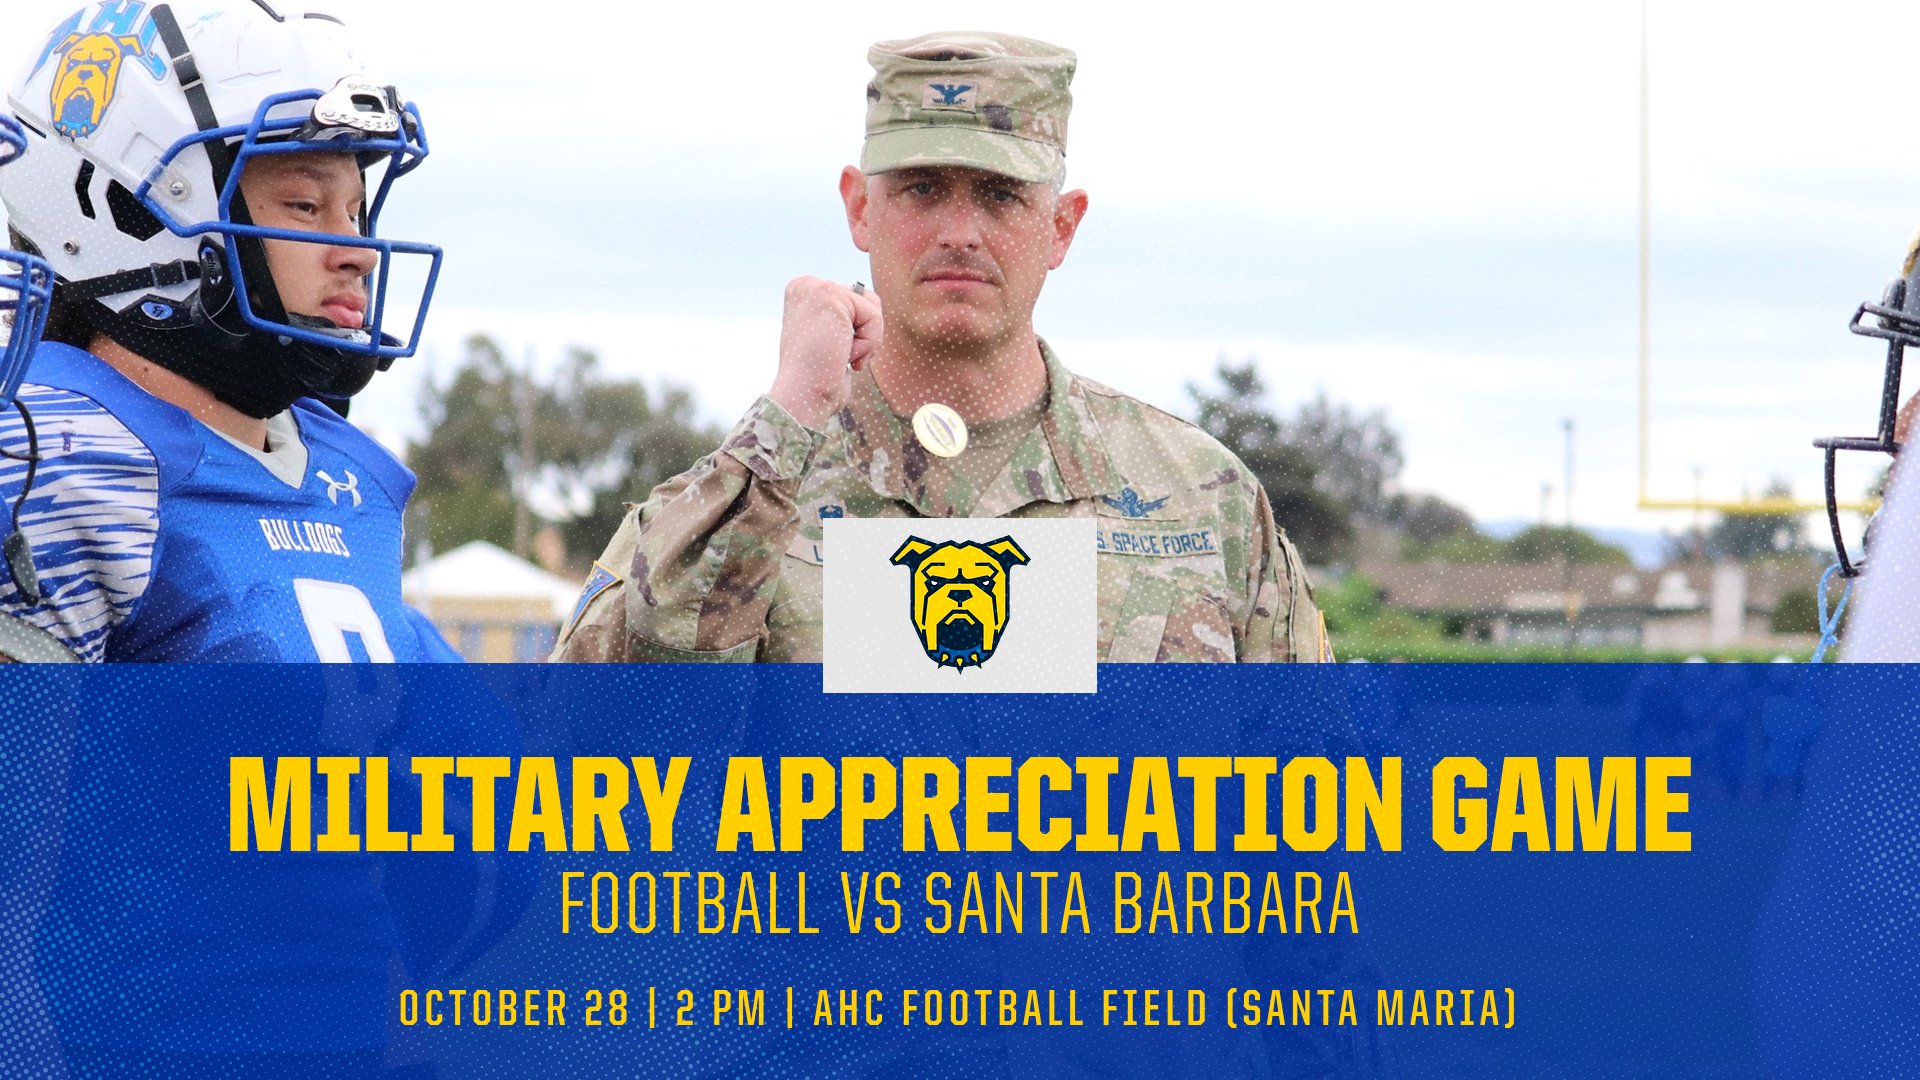 AHC Football to Host Annual Military Appreciation Game on October 28th